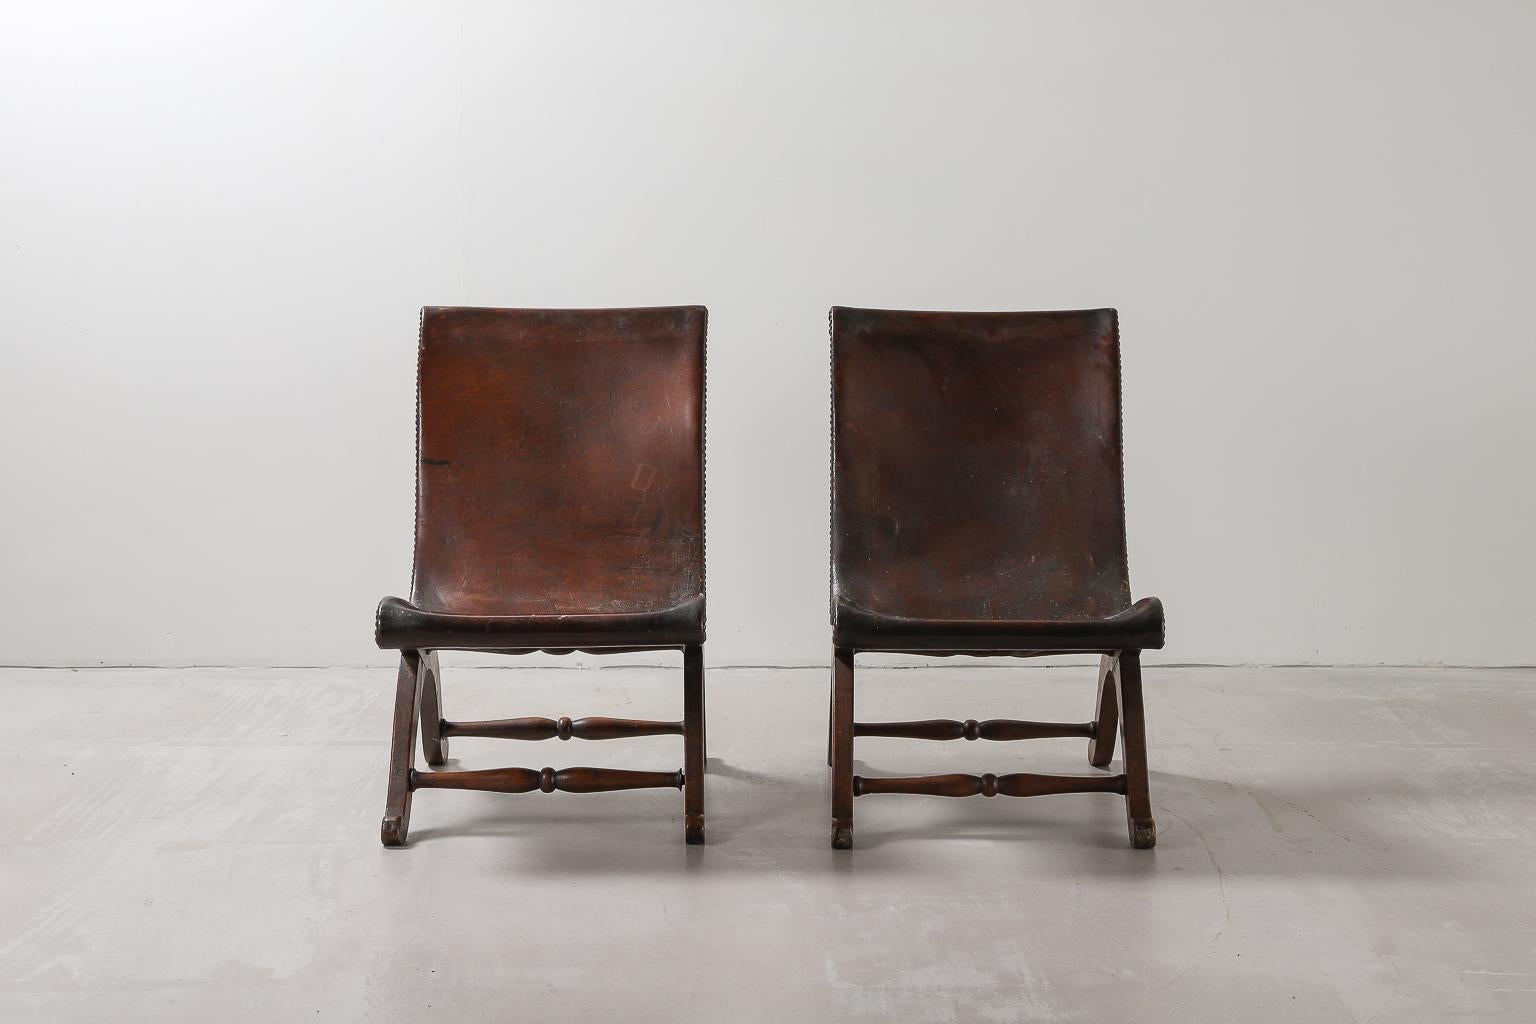 Pair of Spanish leather armchairs by Pierre Lottier for Valenti, 1940s with brass nail head details and original leather. 

Pierre Lottier was born in France before moving to Spain where he worked as a designer, working with the likes of Ava